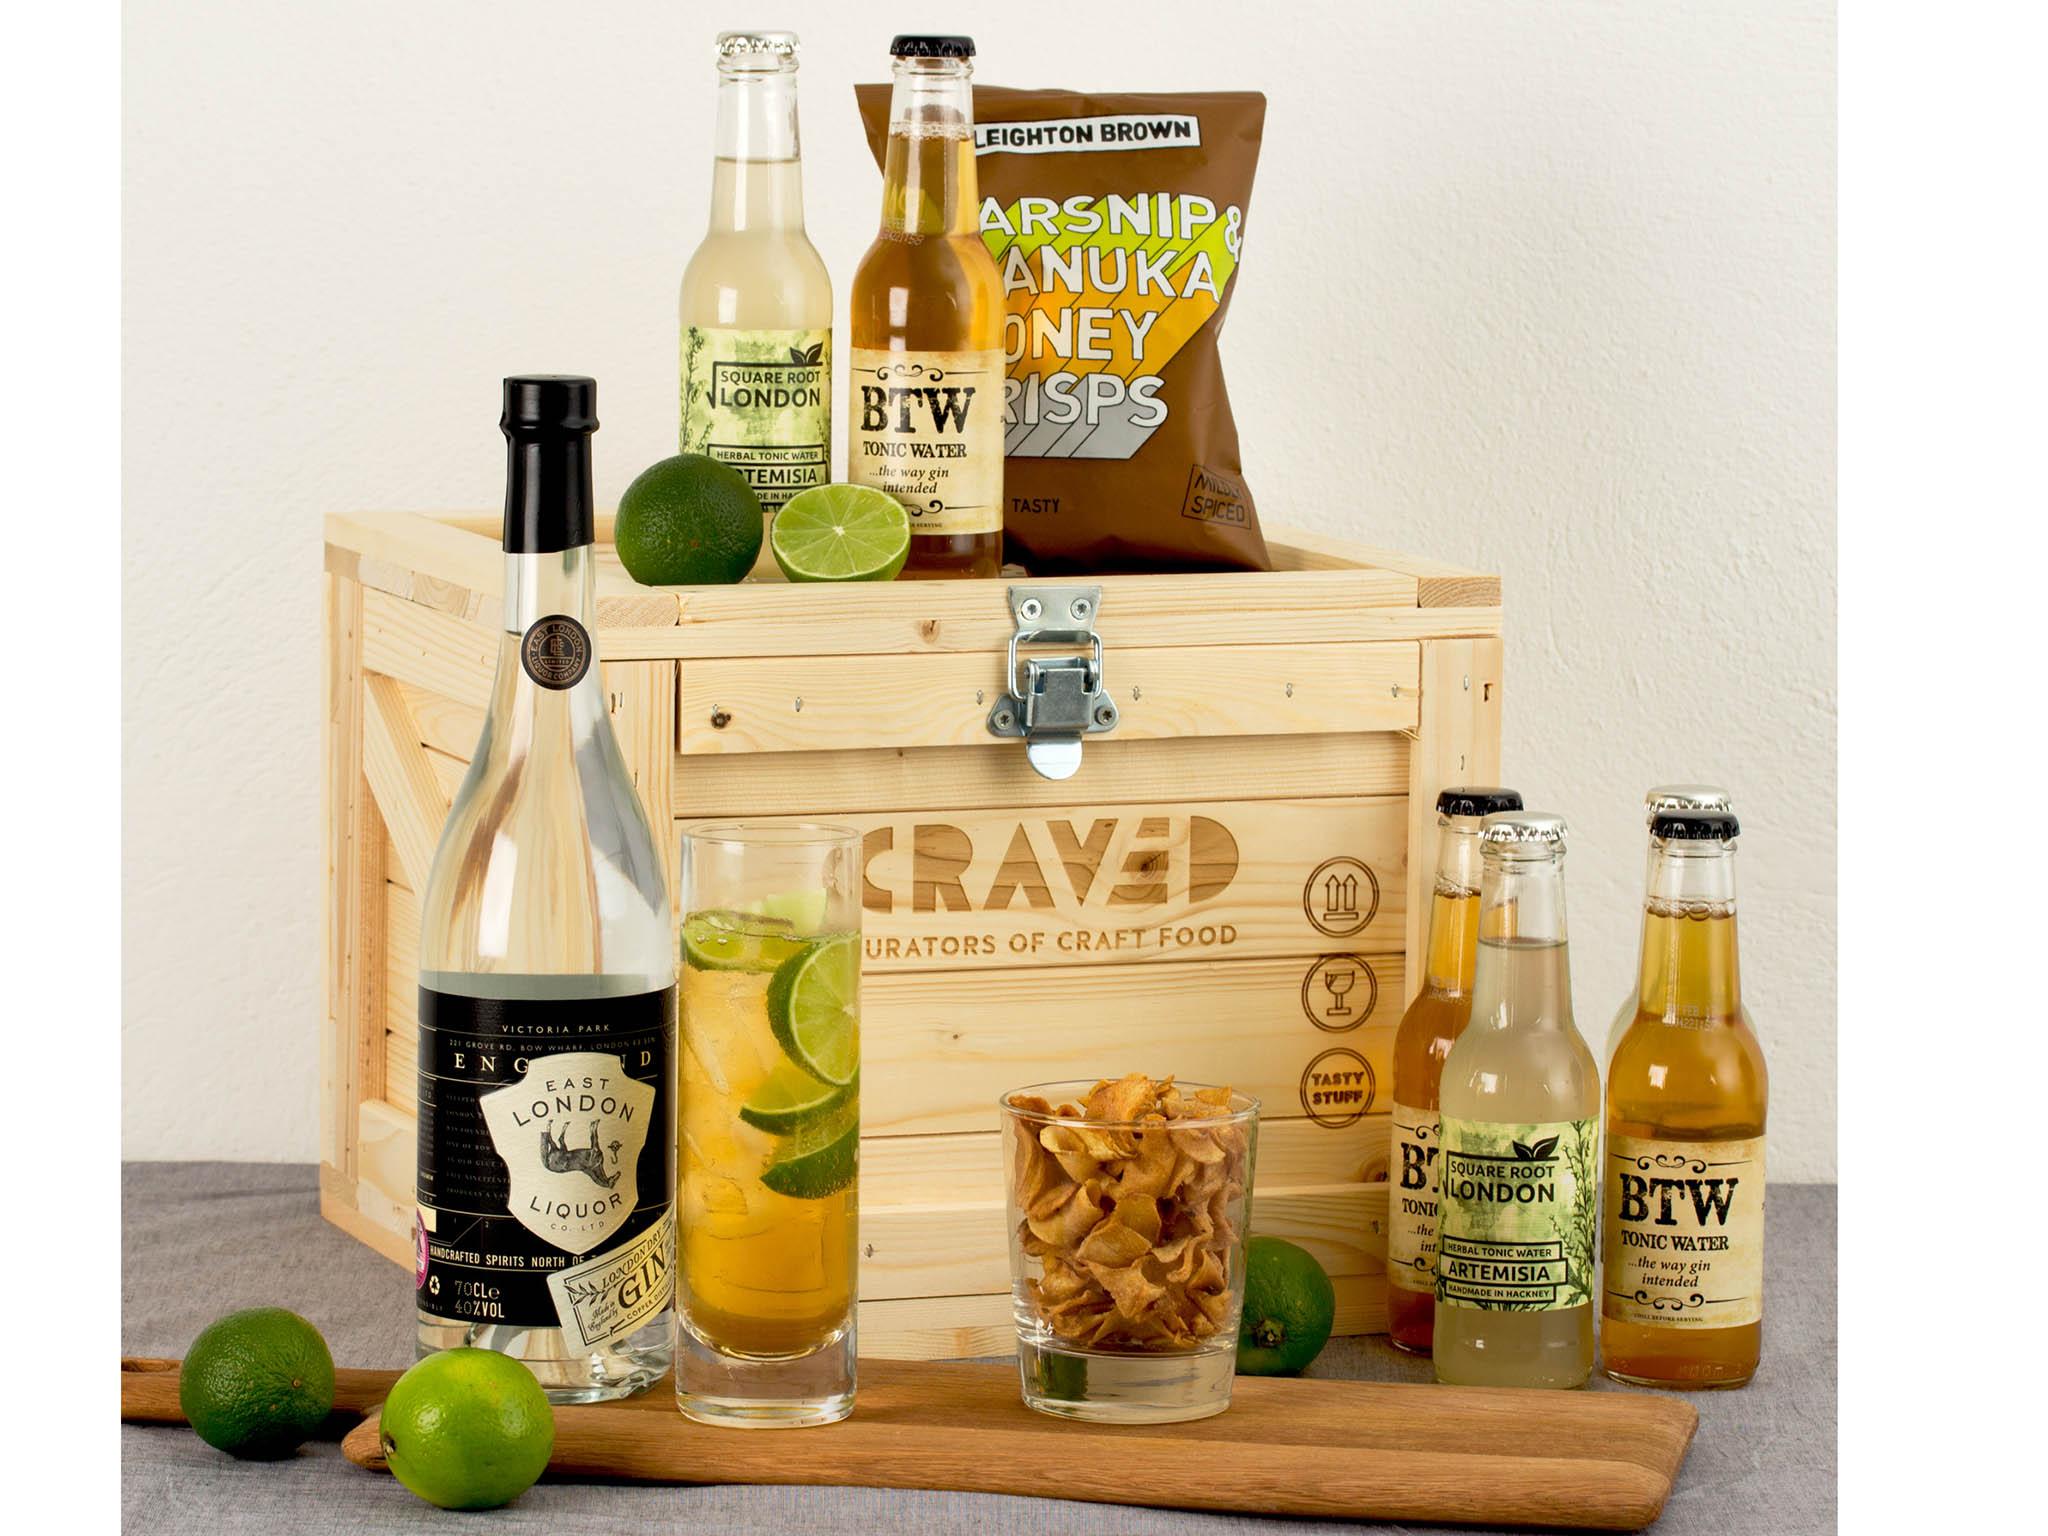 The gin and tonic kit includes a dry gin, tonic waters and snacks – from £39